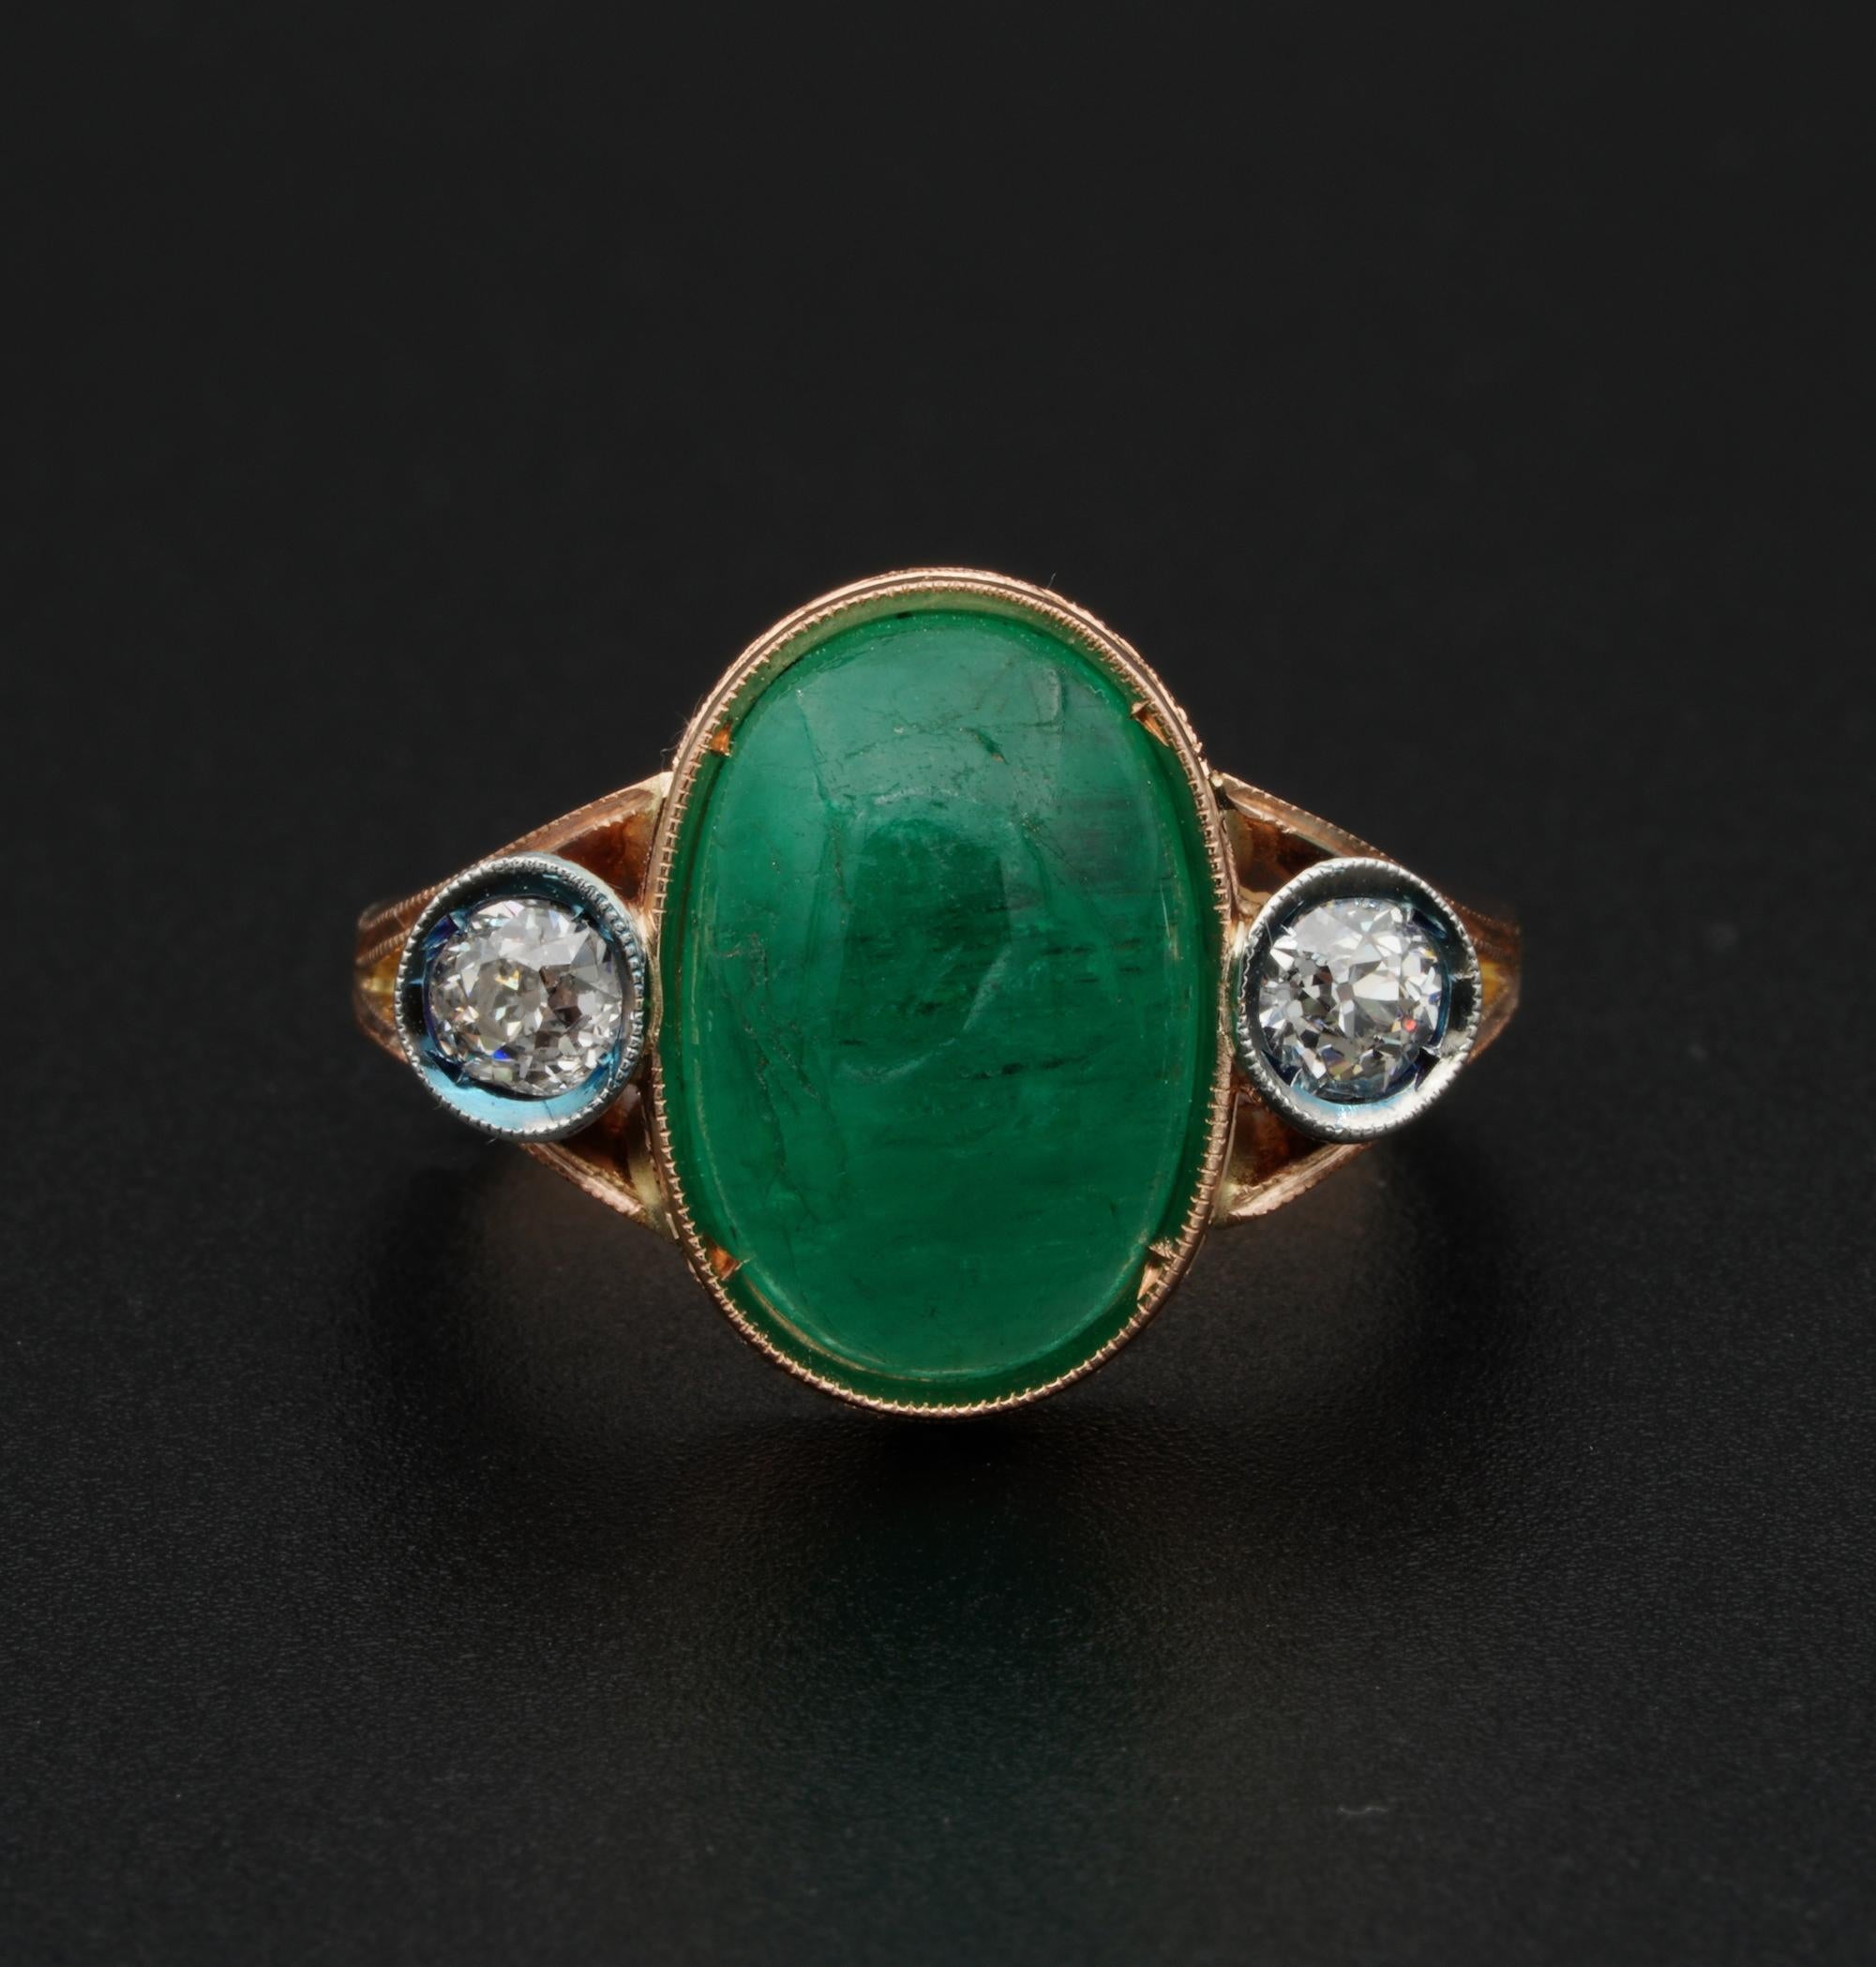 Green Desires

Attractive Edwardian era three stone ring in transition to the Victorian era – 1900 ca.
Beautiful rich gold colour setting of solid 18 KT gold boasting finest past workmanship, with carving details and lovely design
The main stone is